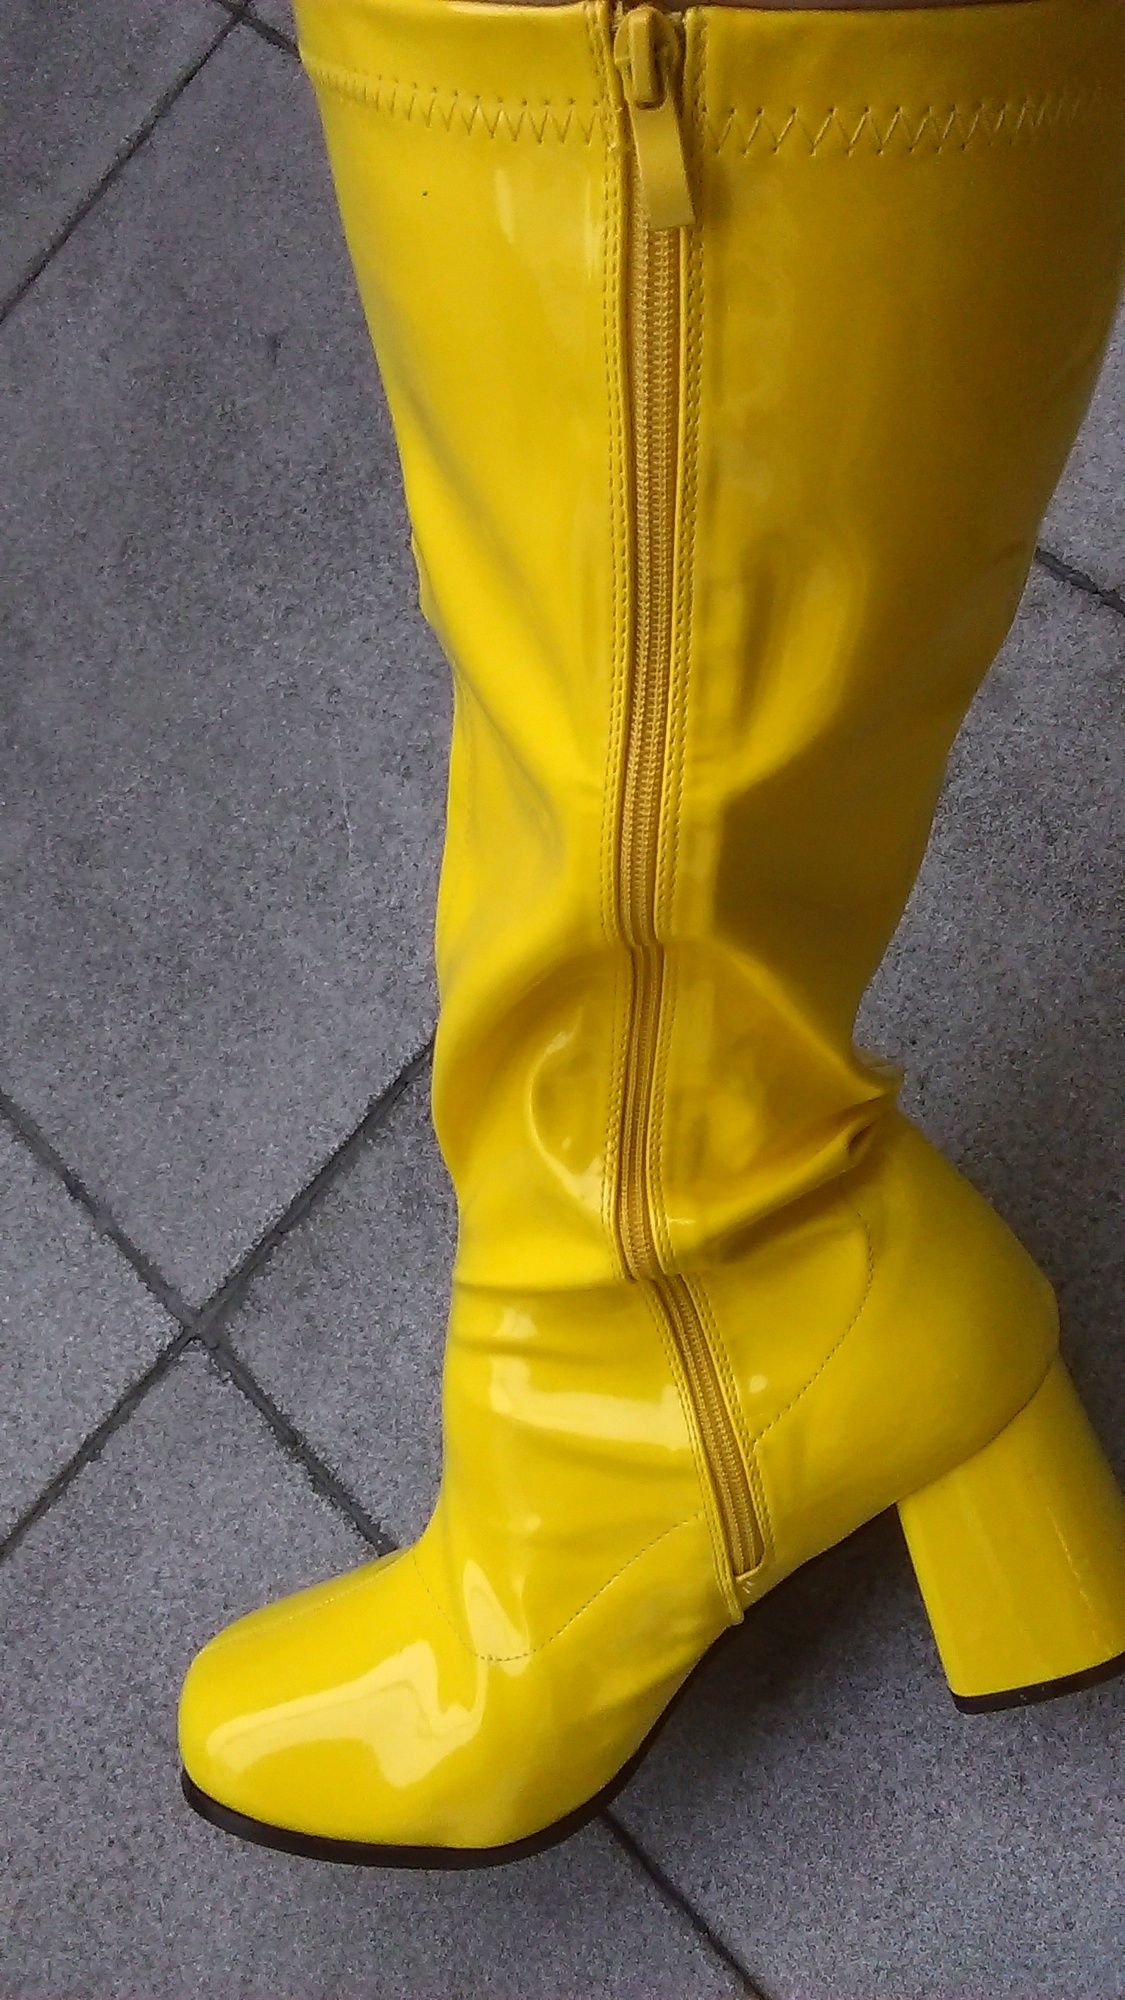 My Boots #2